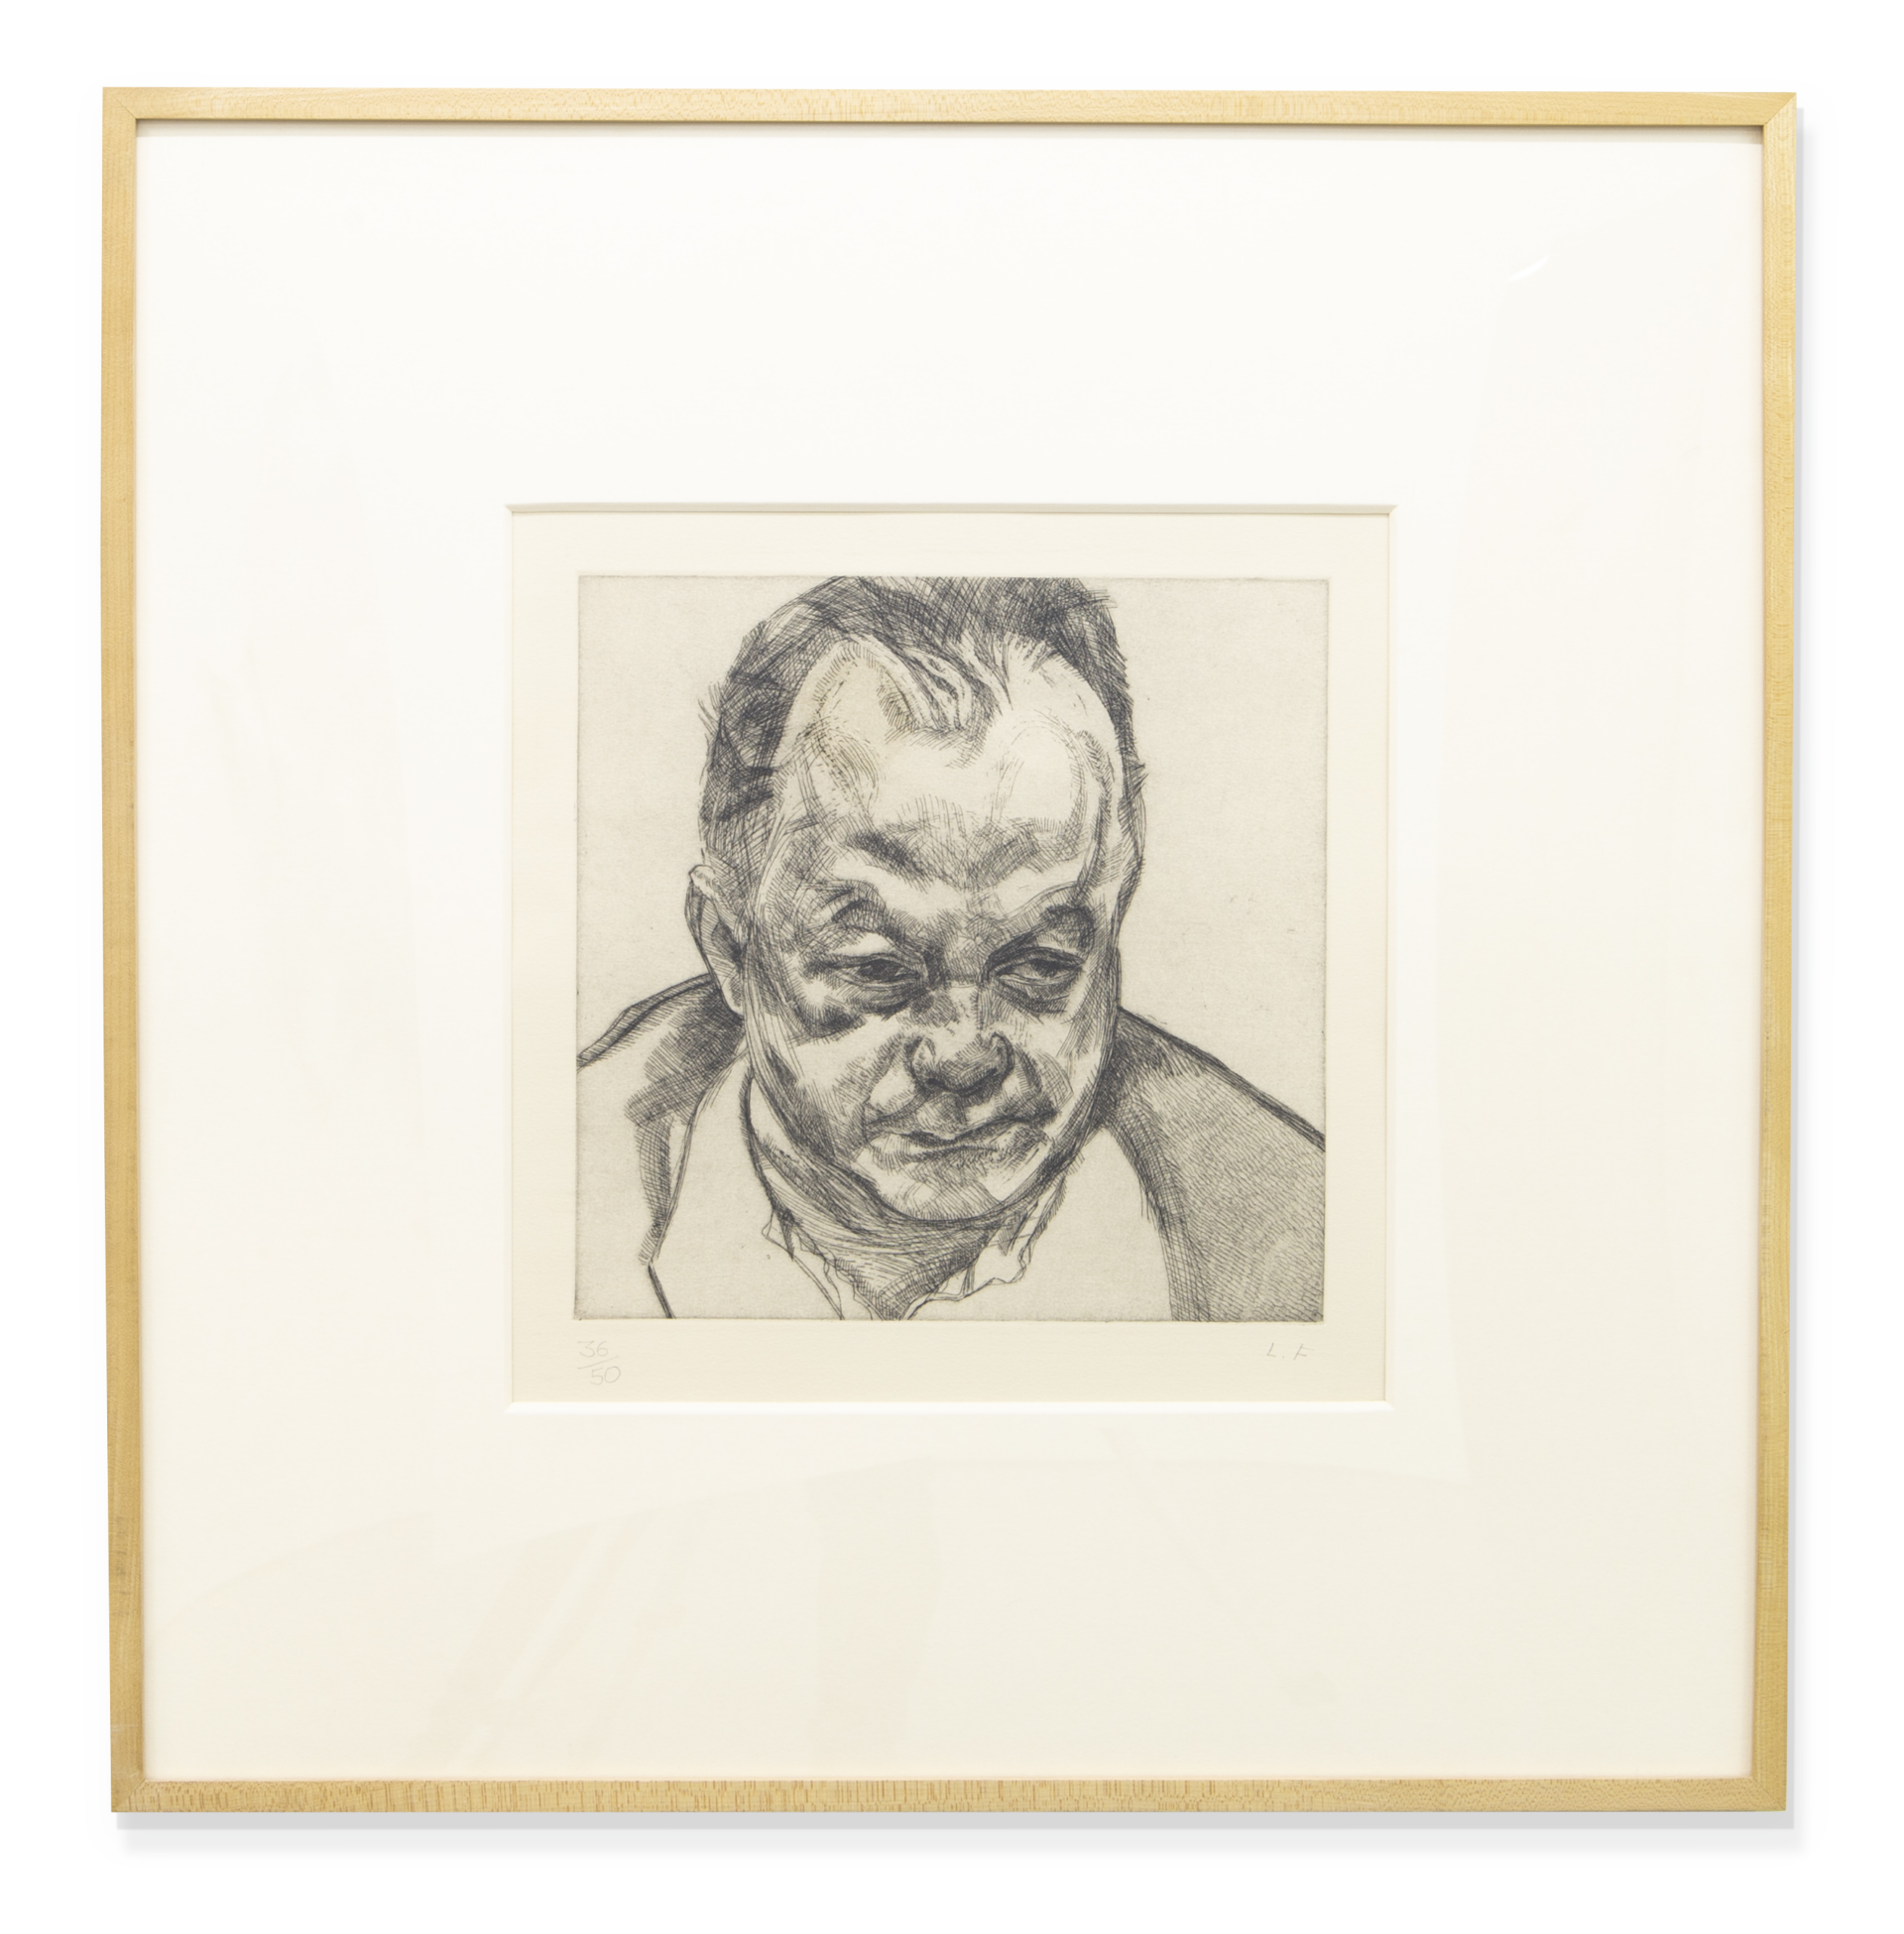 Head of Bruce Bernard, 1985, Etching, 20 x 18 1/2 inches (50.8 x 47 cm), Edition of 50